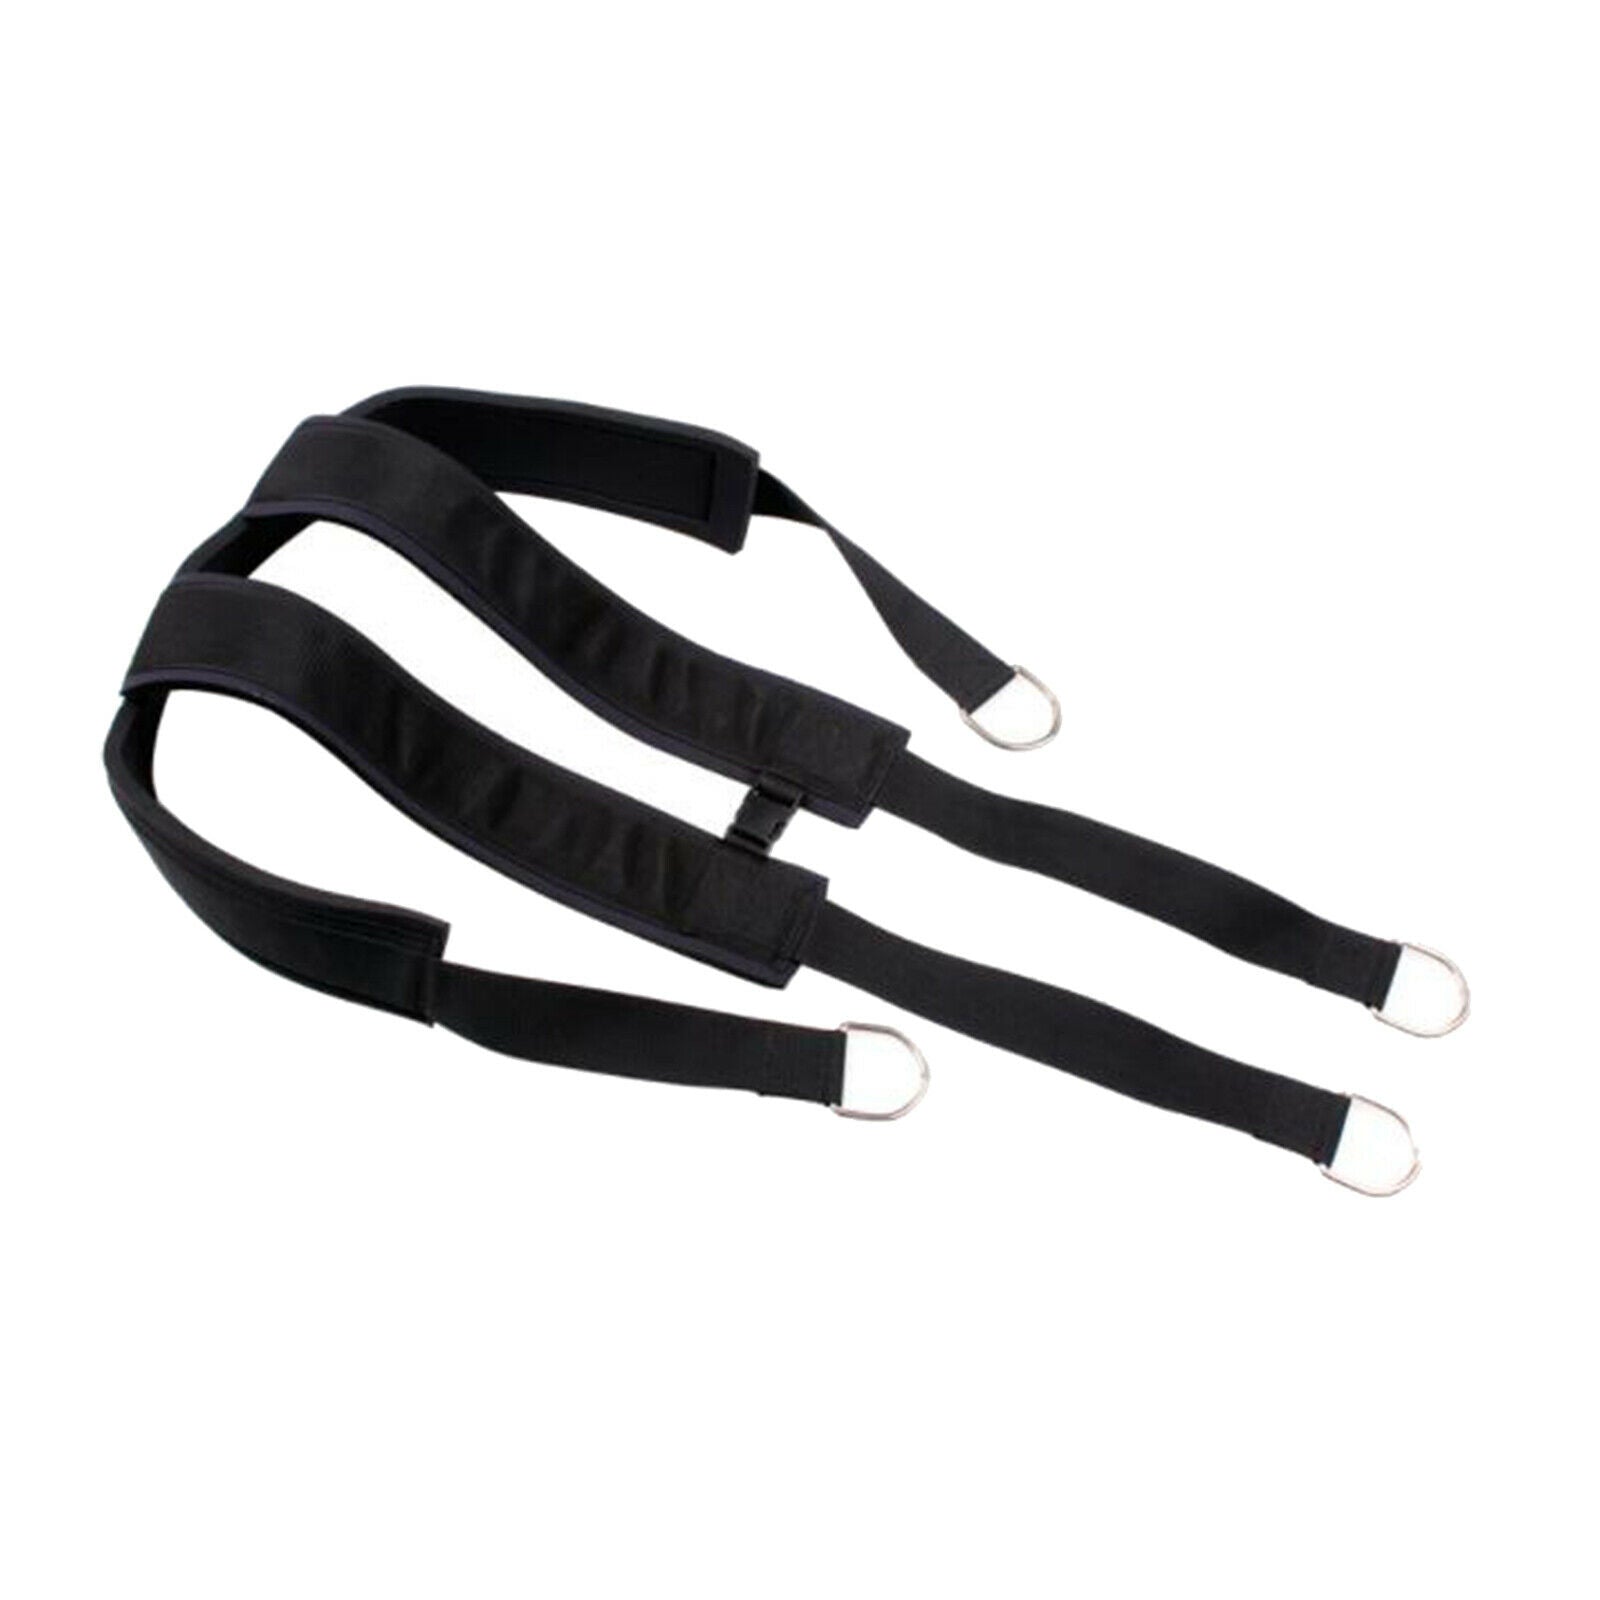 Sled Harness Kits Resistance Belt Workout Physical Training with Pull Strap